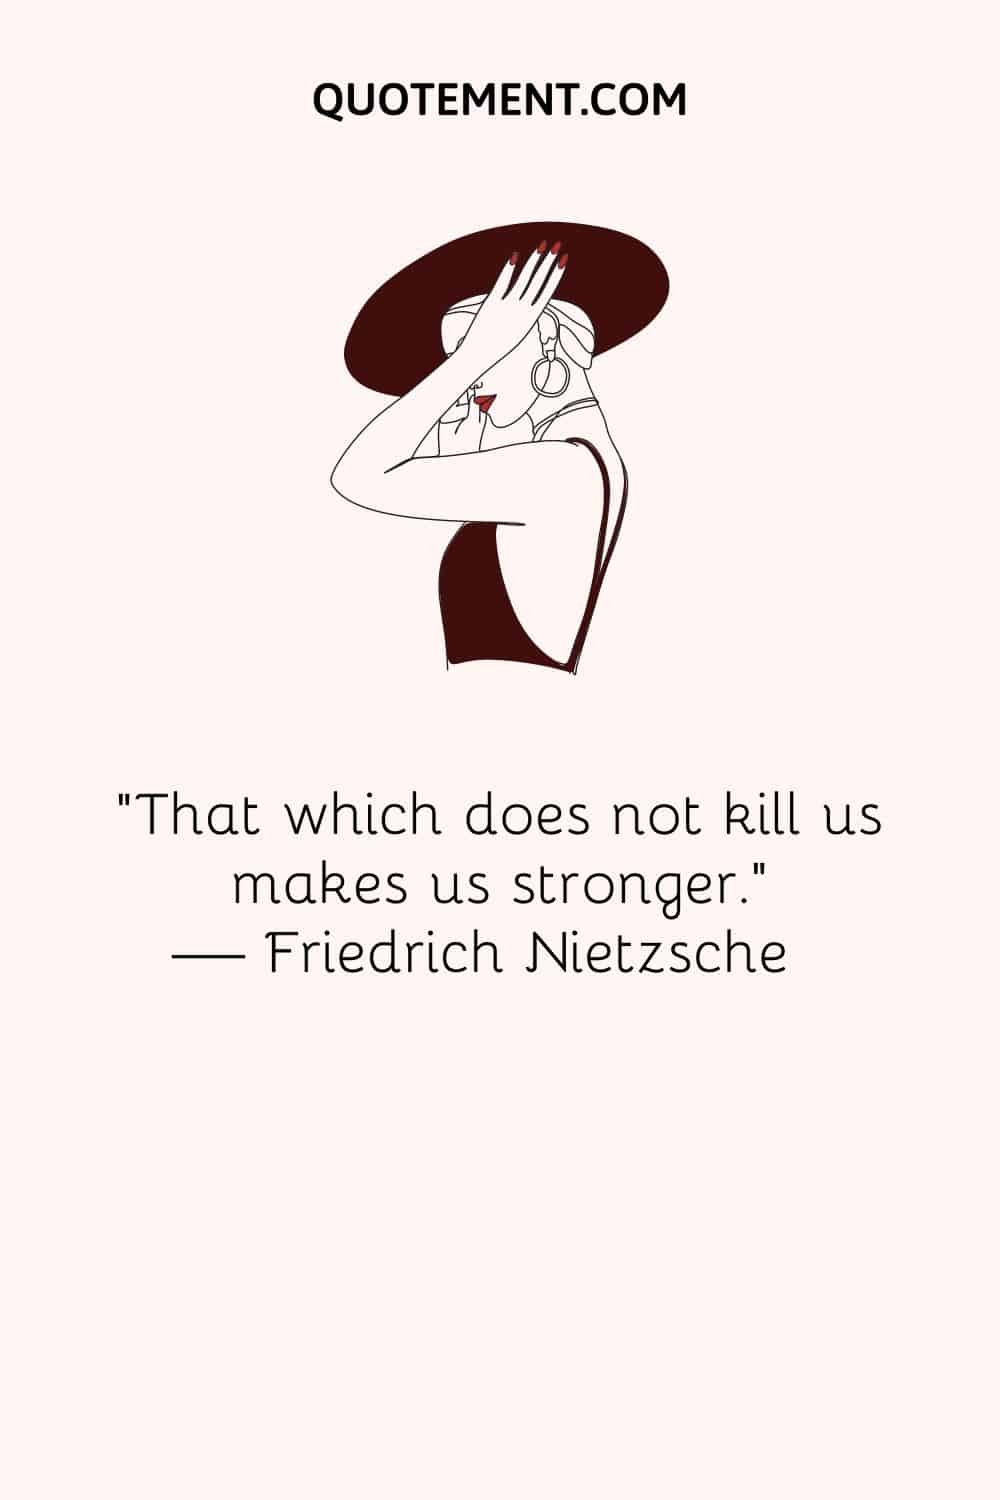 “That which does not kill us makes us stronger.” — Friedrich Nietzsche 